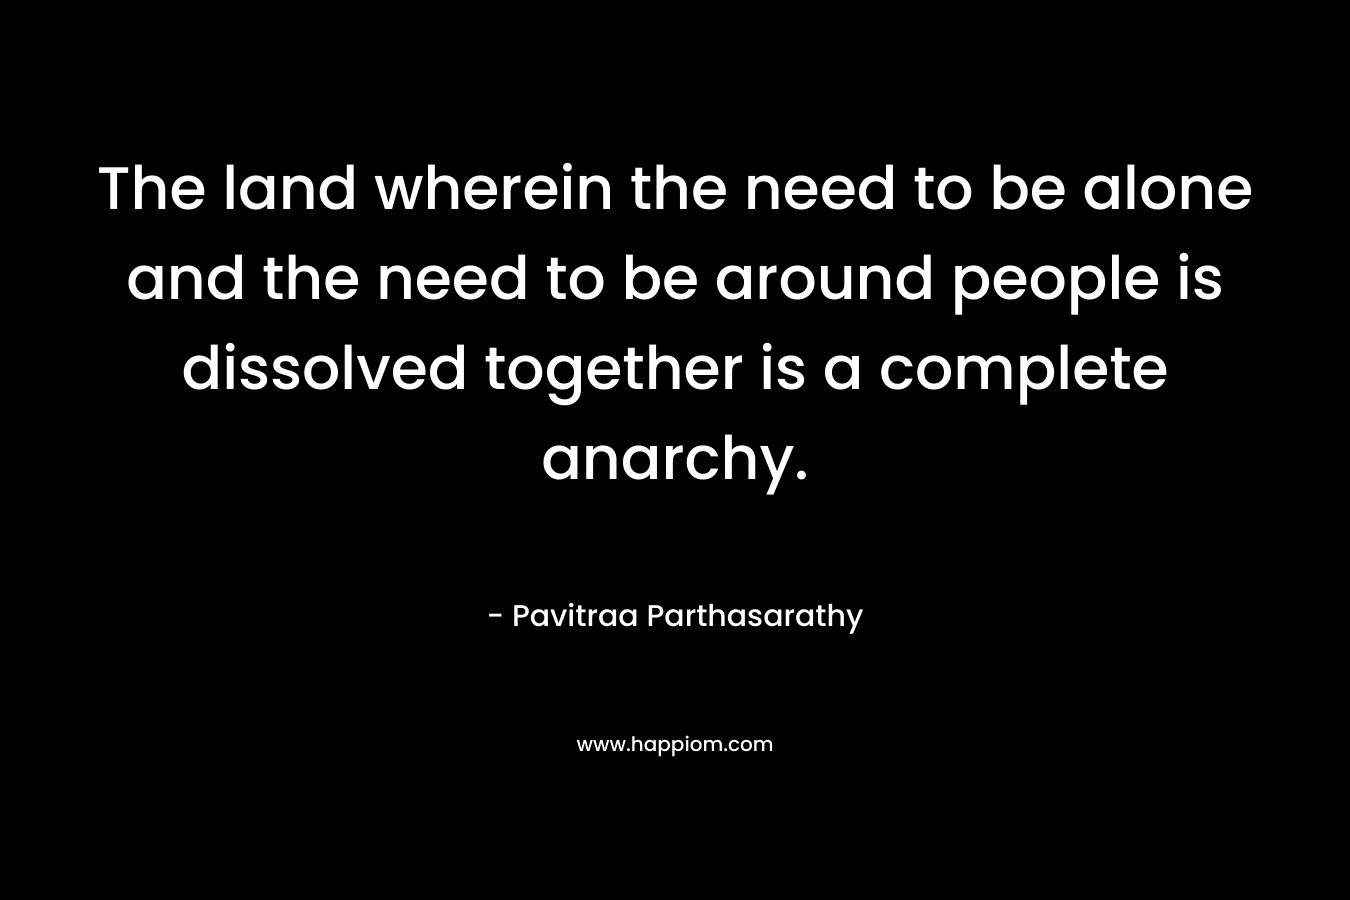 The land wherein the need to be alone and the need to be around people is dissolved together is a complete anarchy.